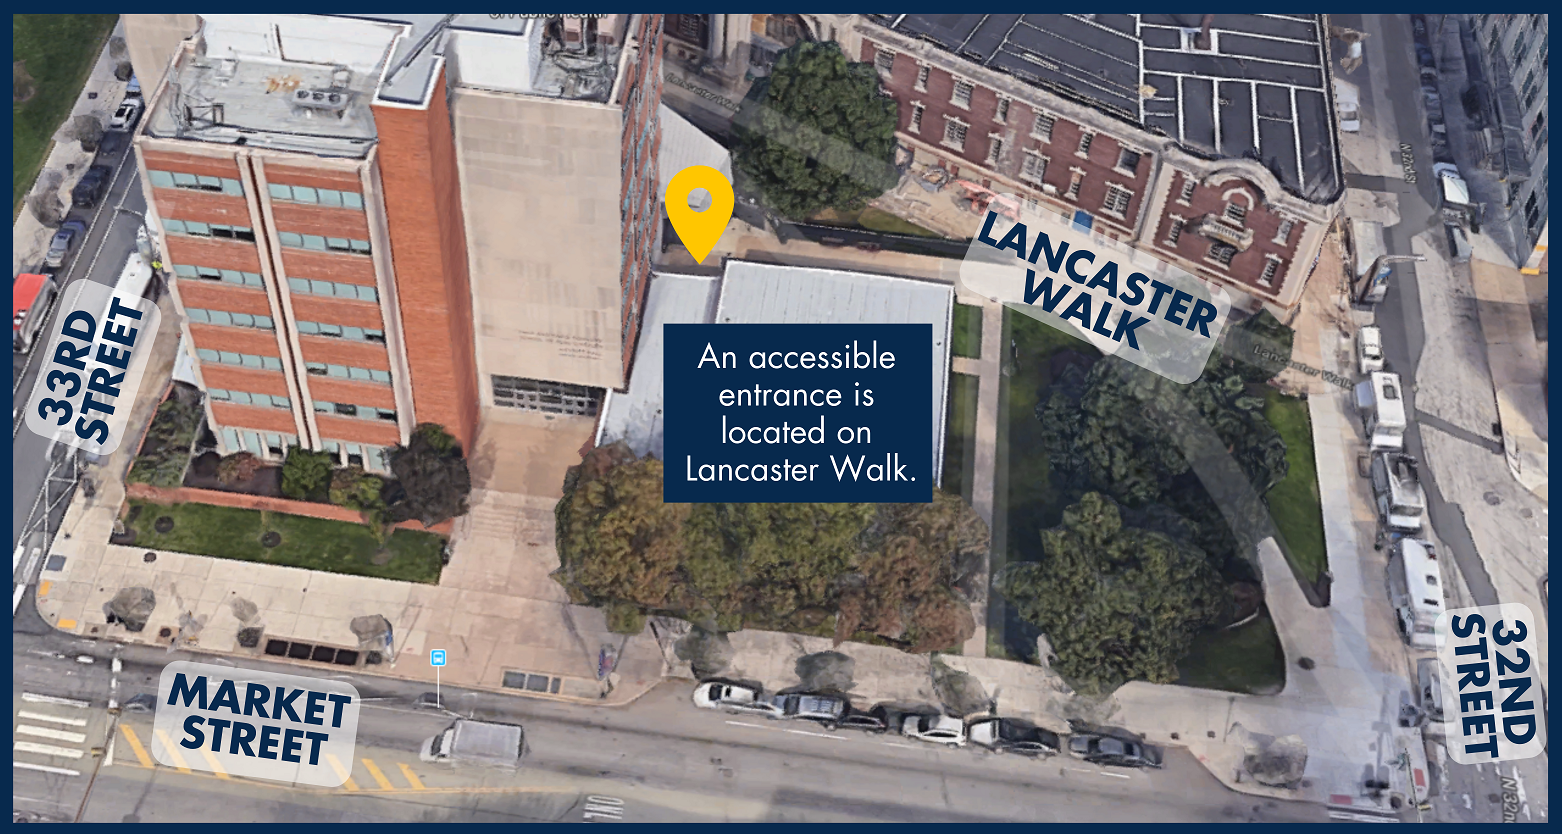 An accessible entrance is located on Lancaster Walk